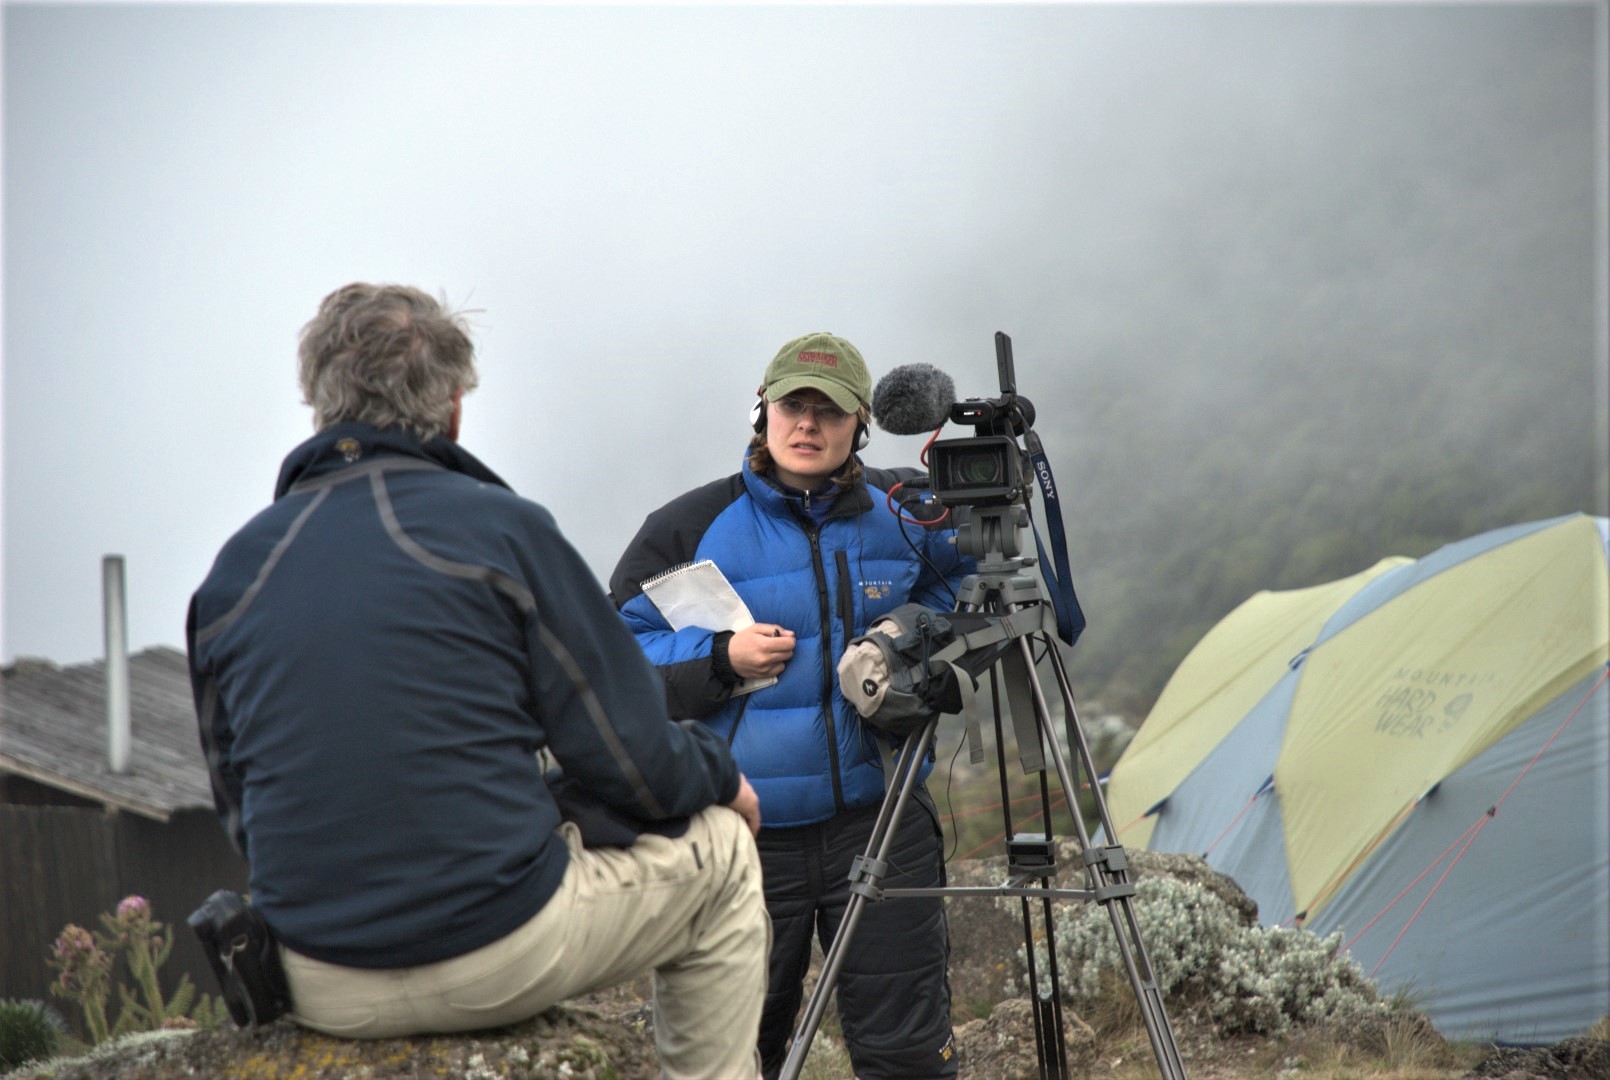 Interviewing a climber on the mountain